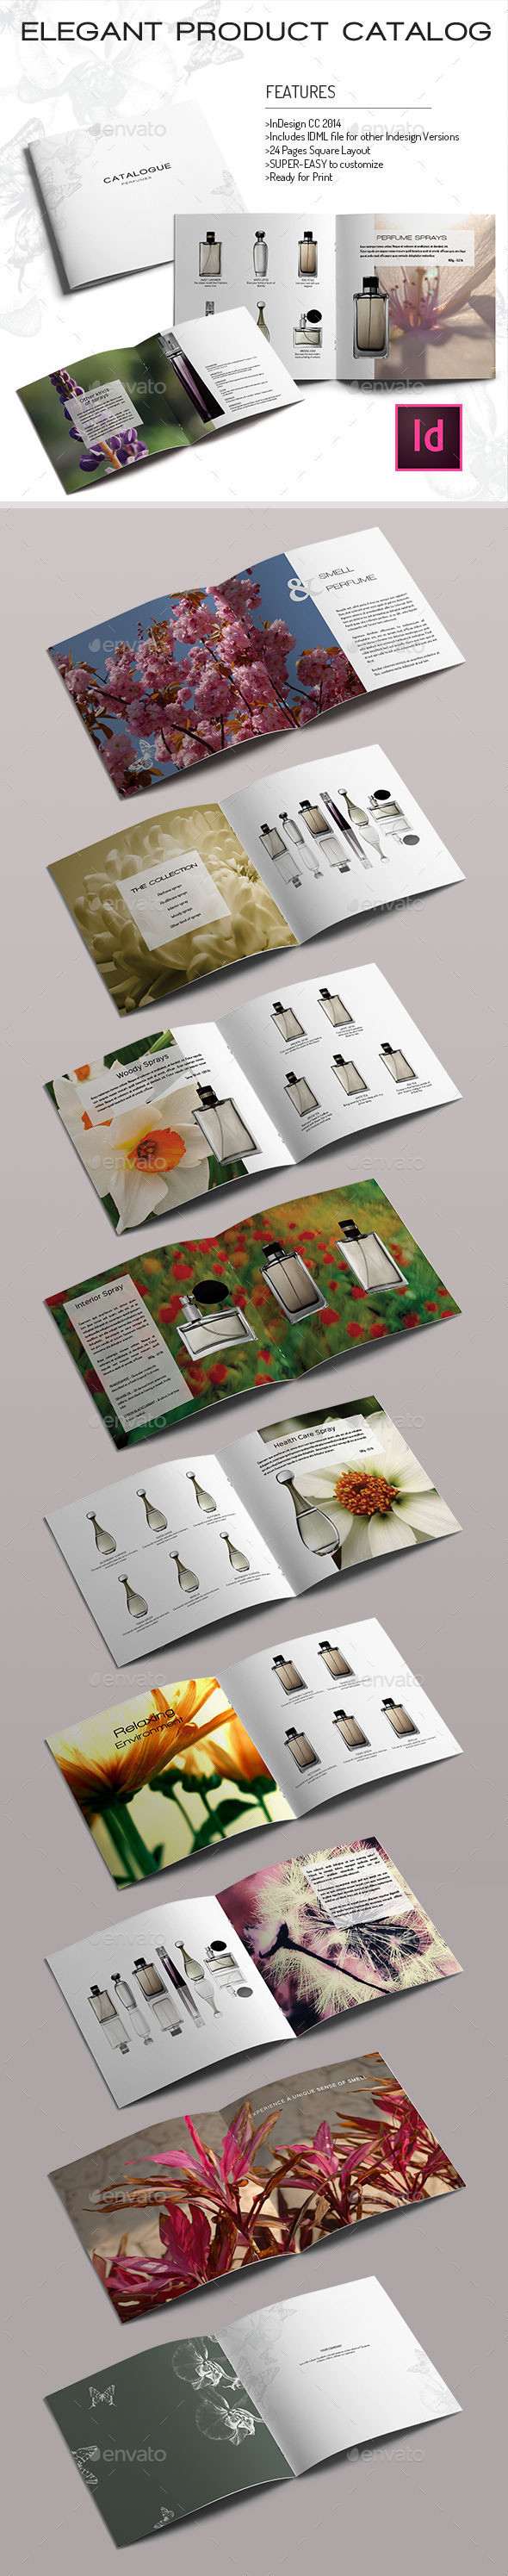 Clean 20elegant 20product 20catalog 20indesign 20template 20preview